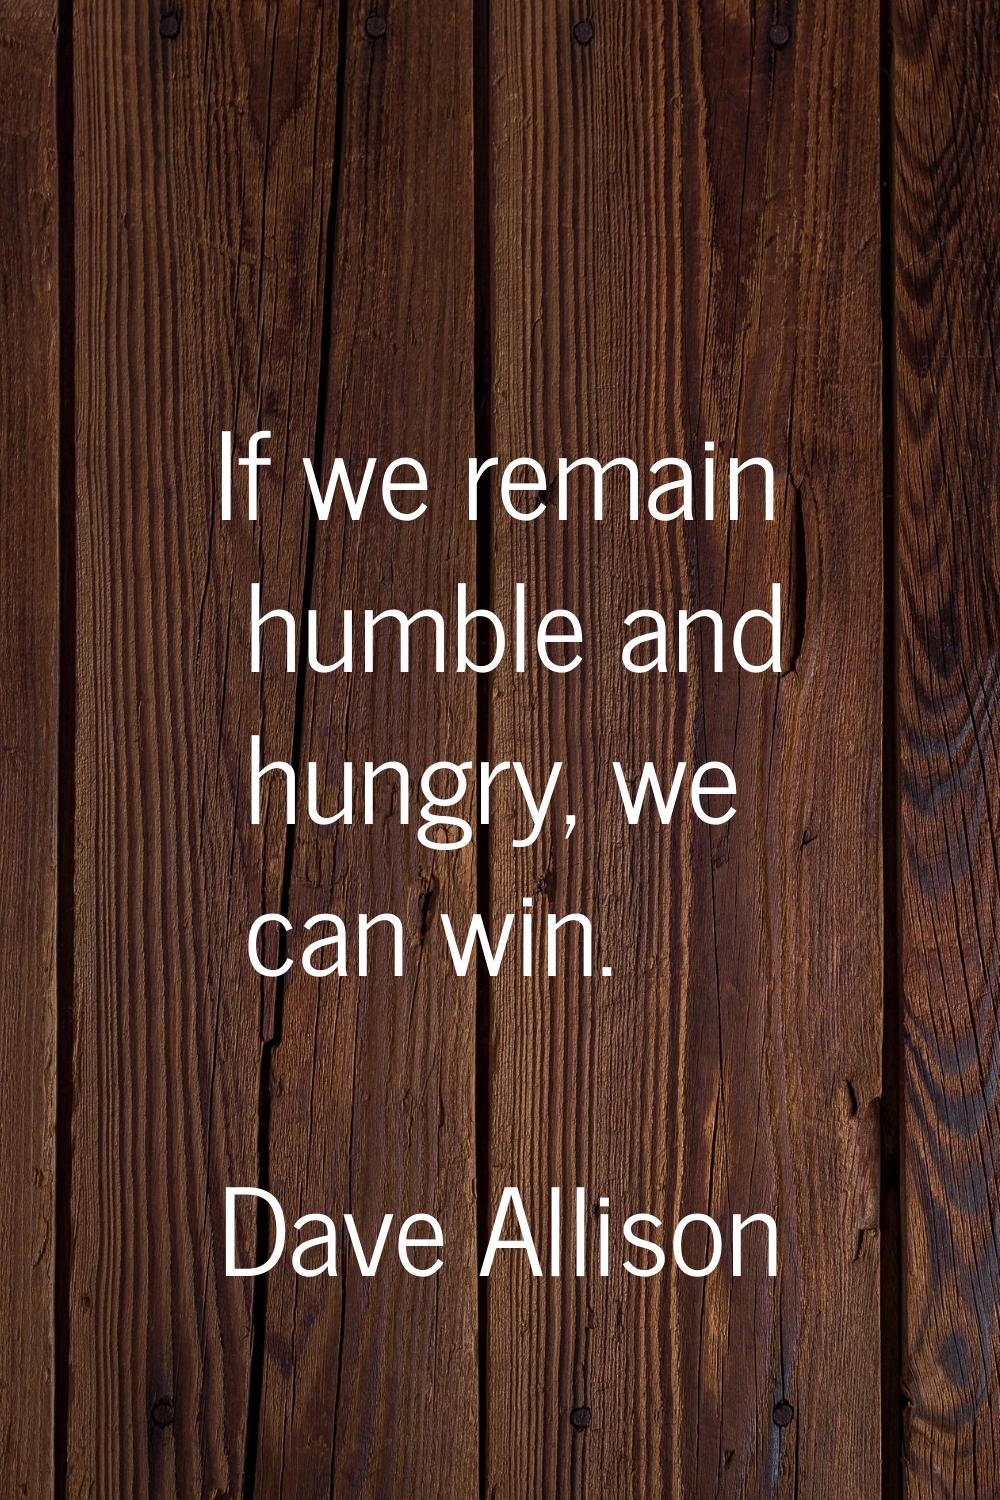 If we remain humble and hungry, we can win.